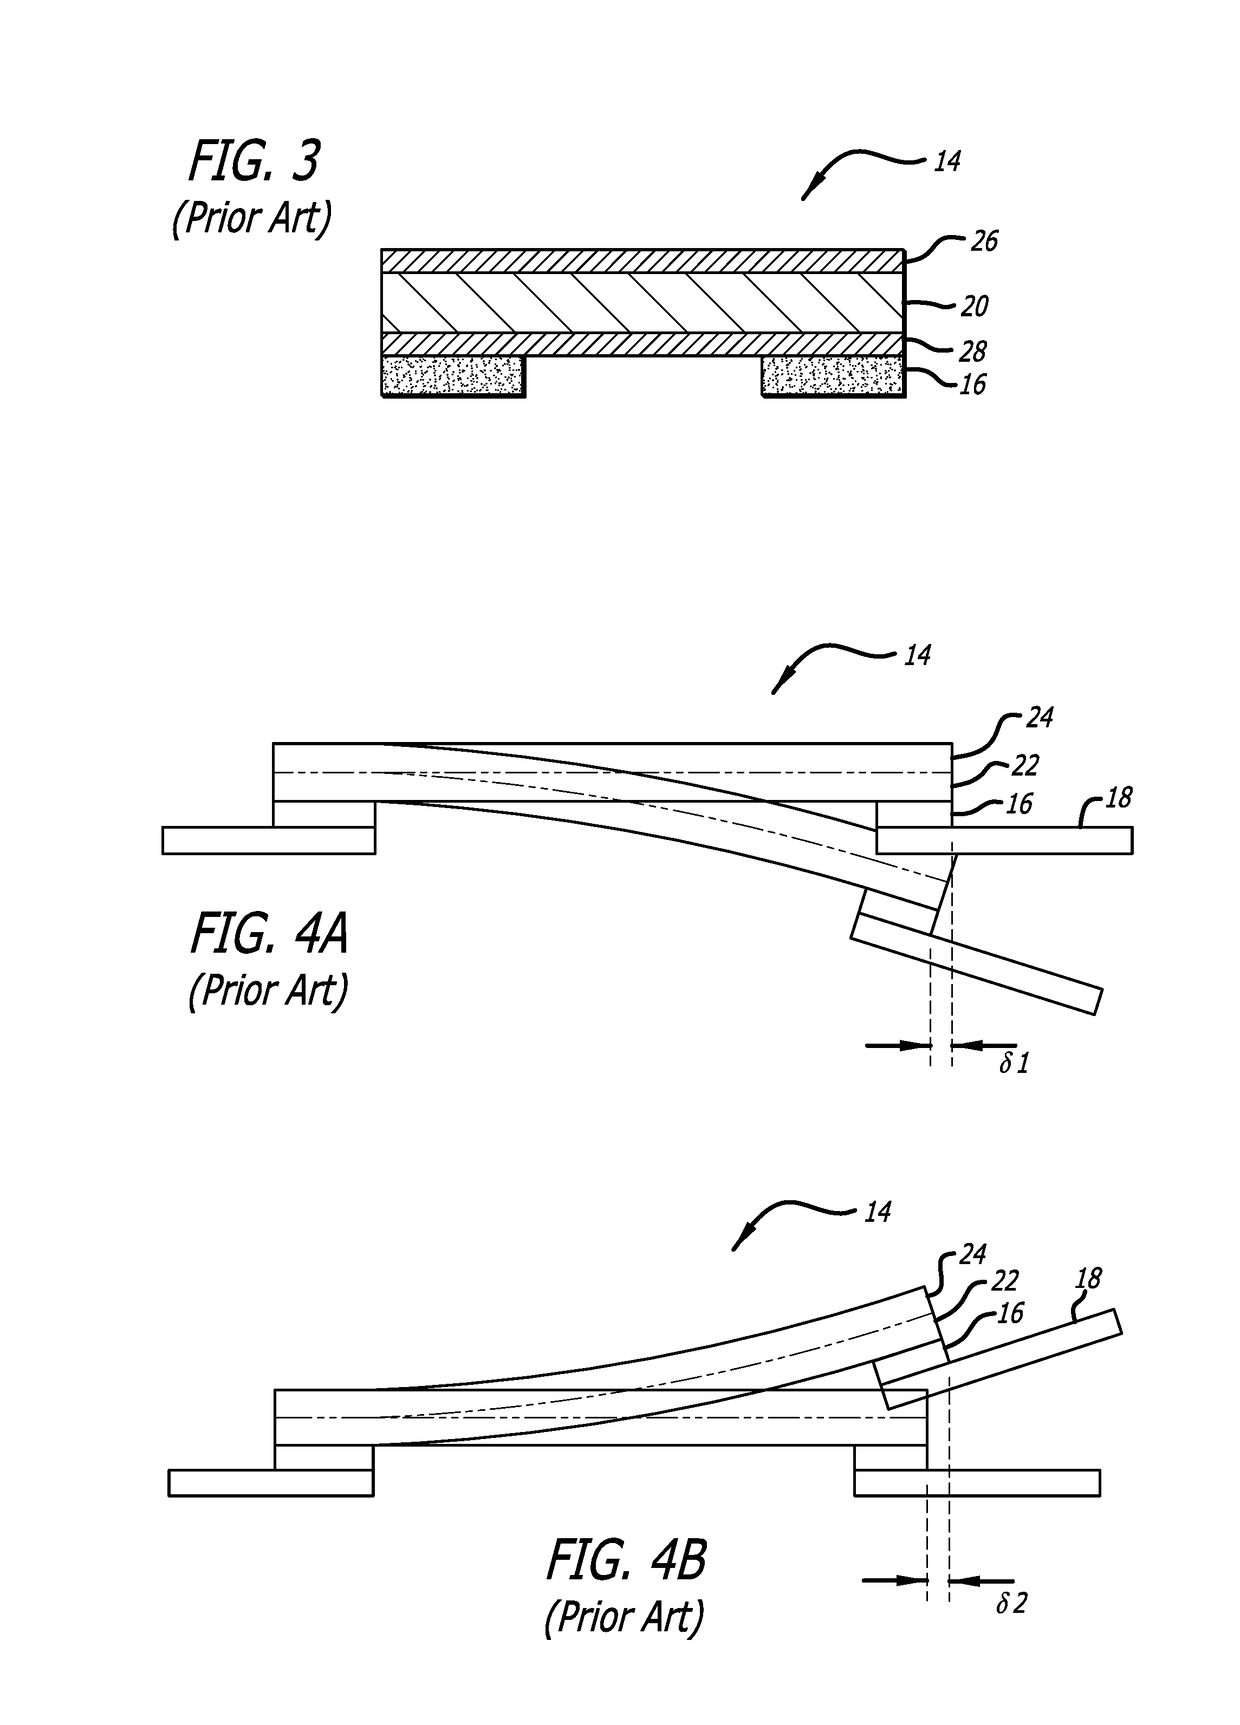 Multi-layer PZT microactuator having a poled but inactive PZT constraining layer